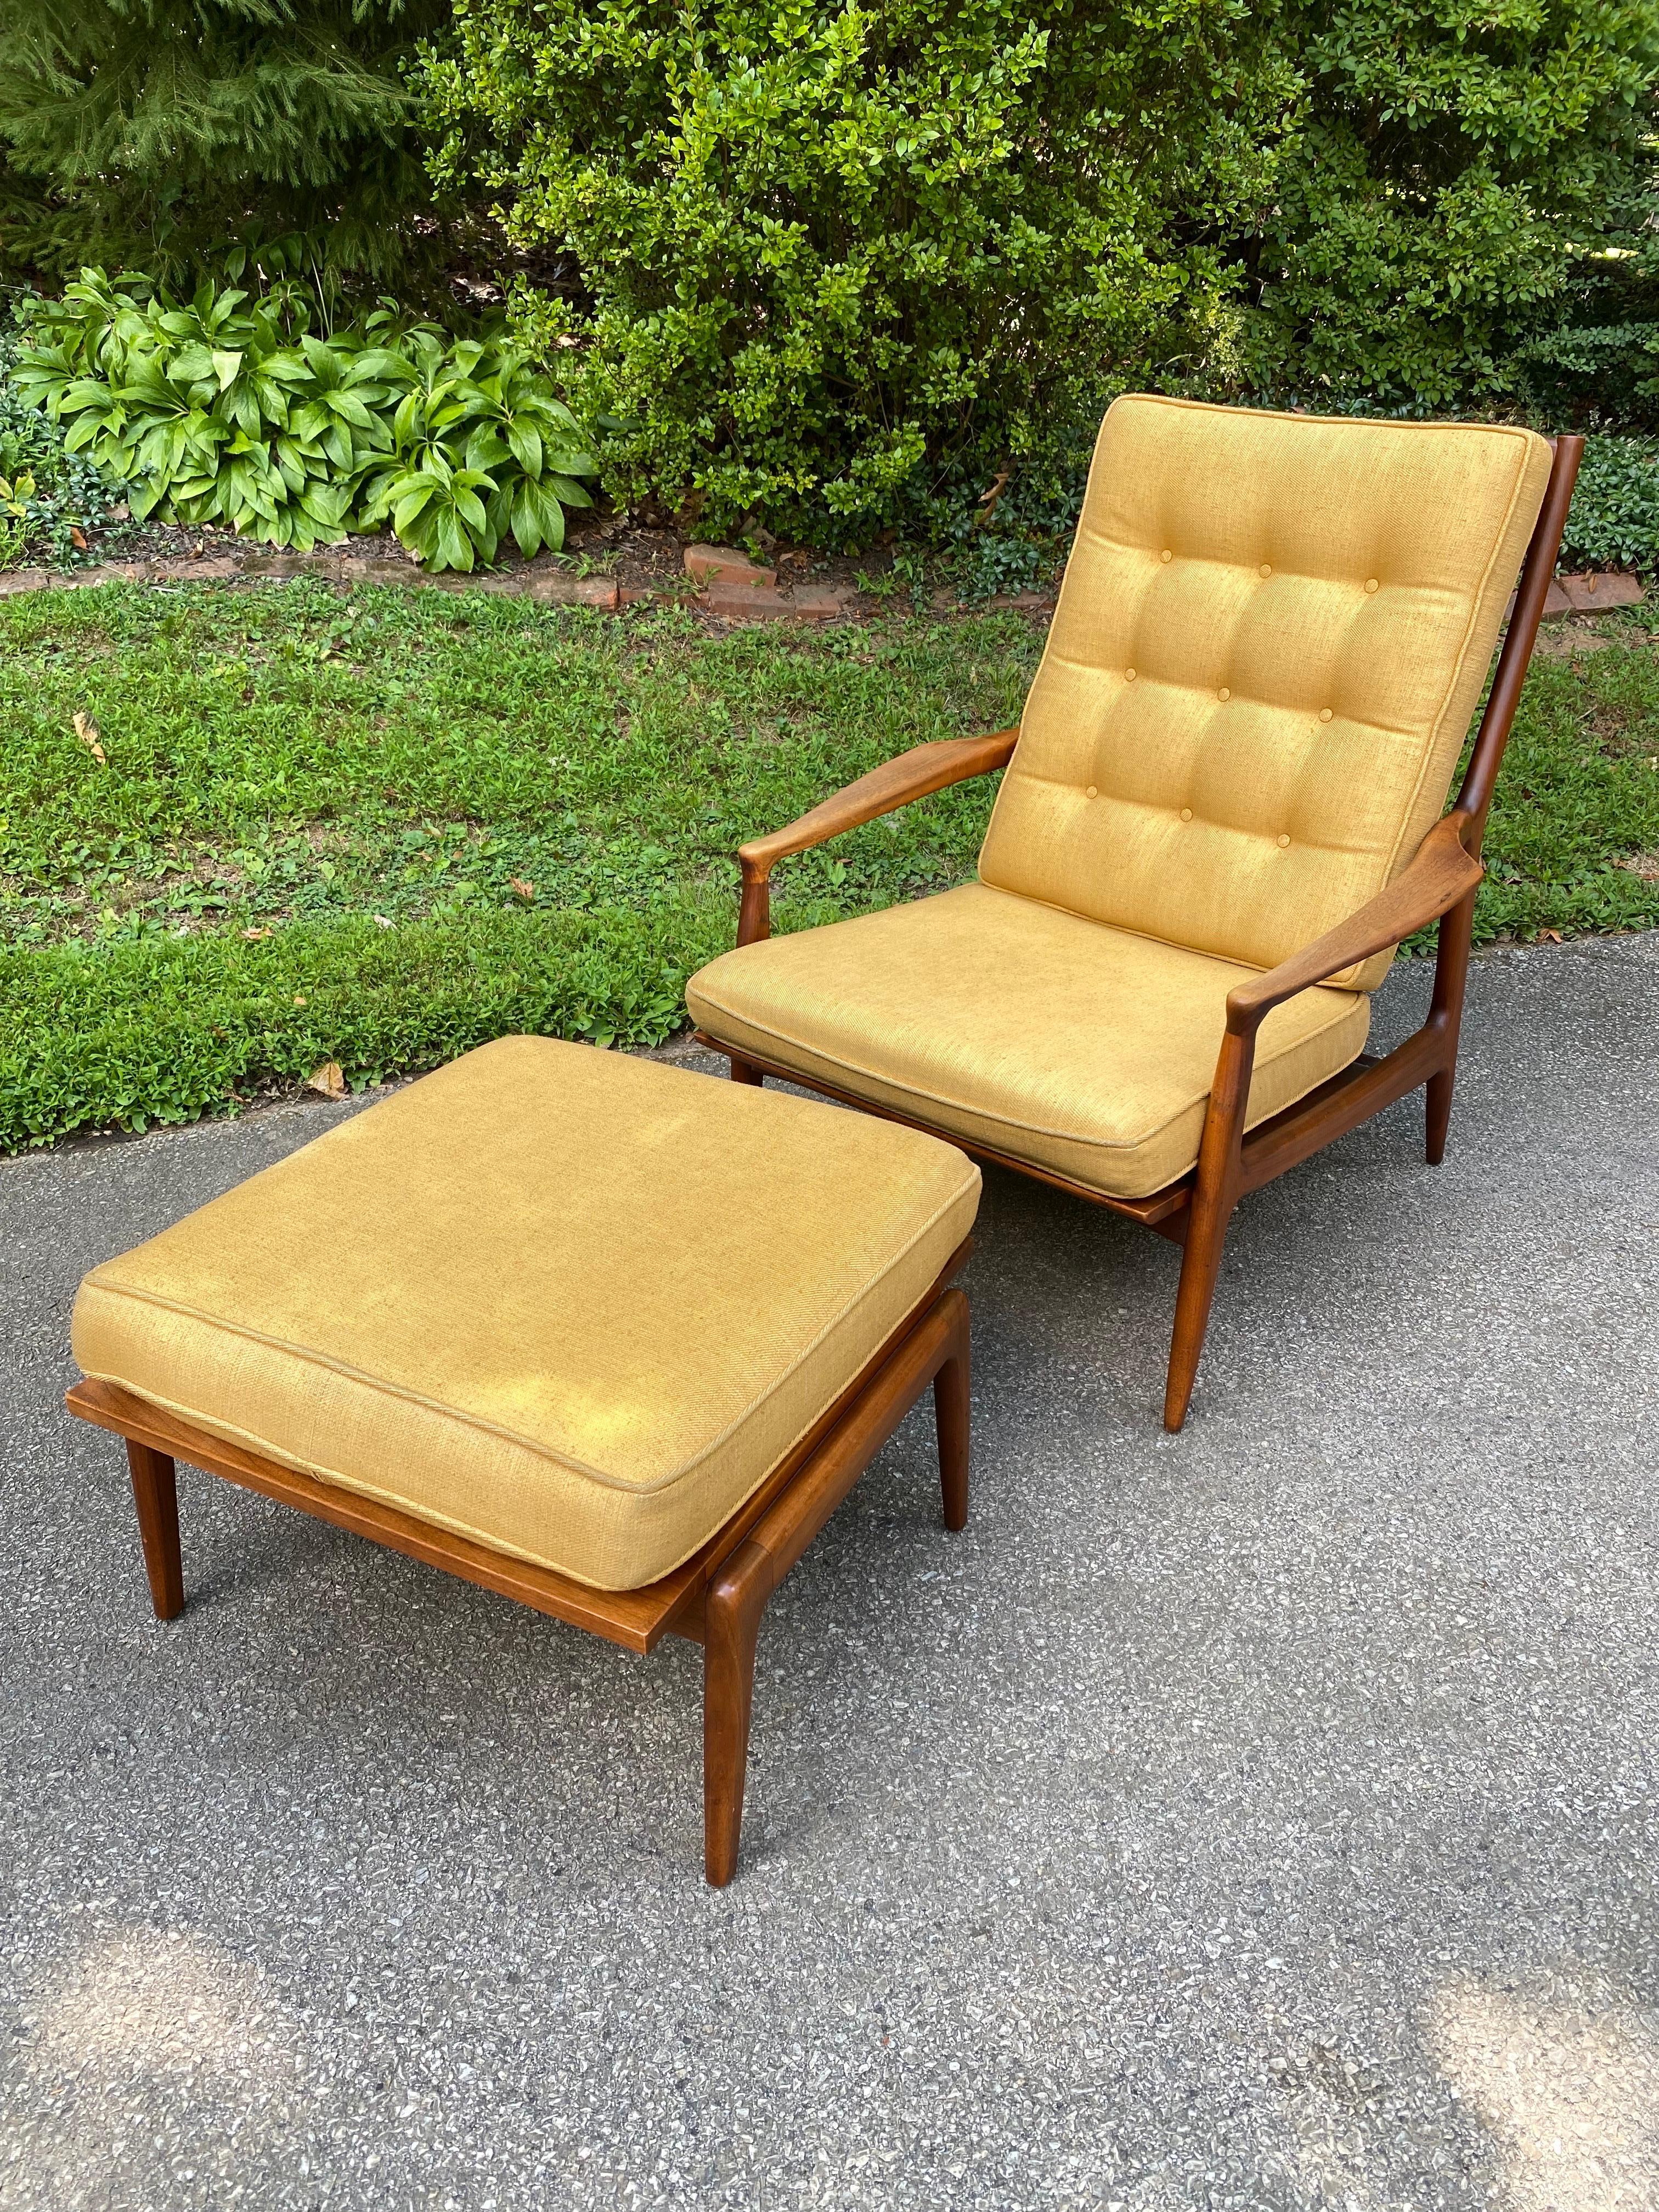 Upholstery Milo Baughman for James Furniture Open Armchair and Ottoman